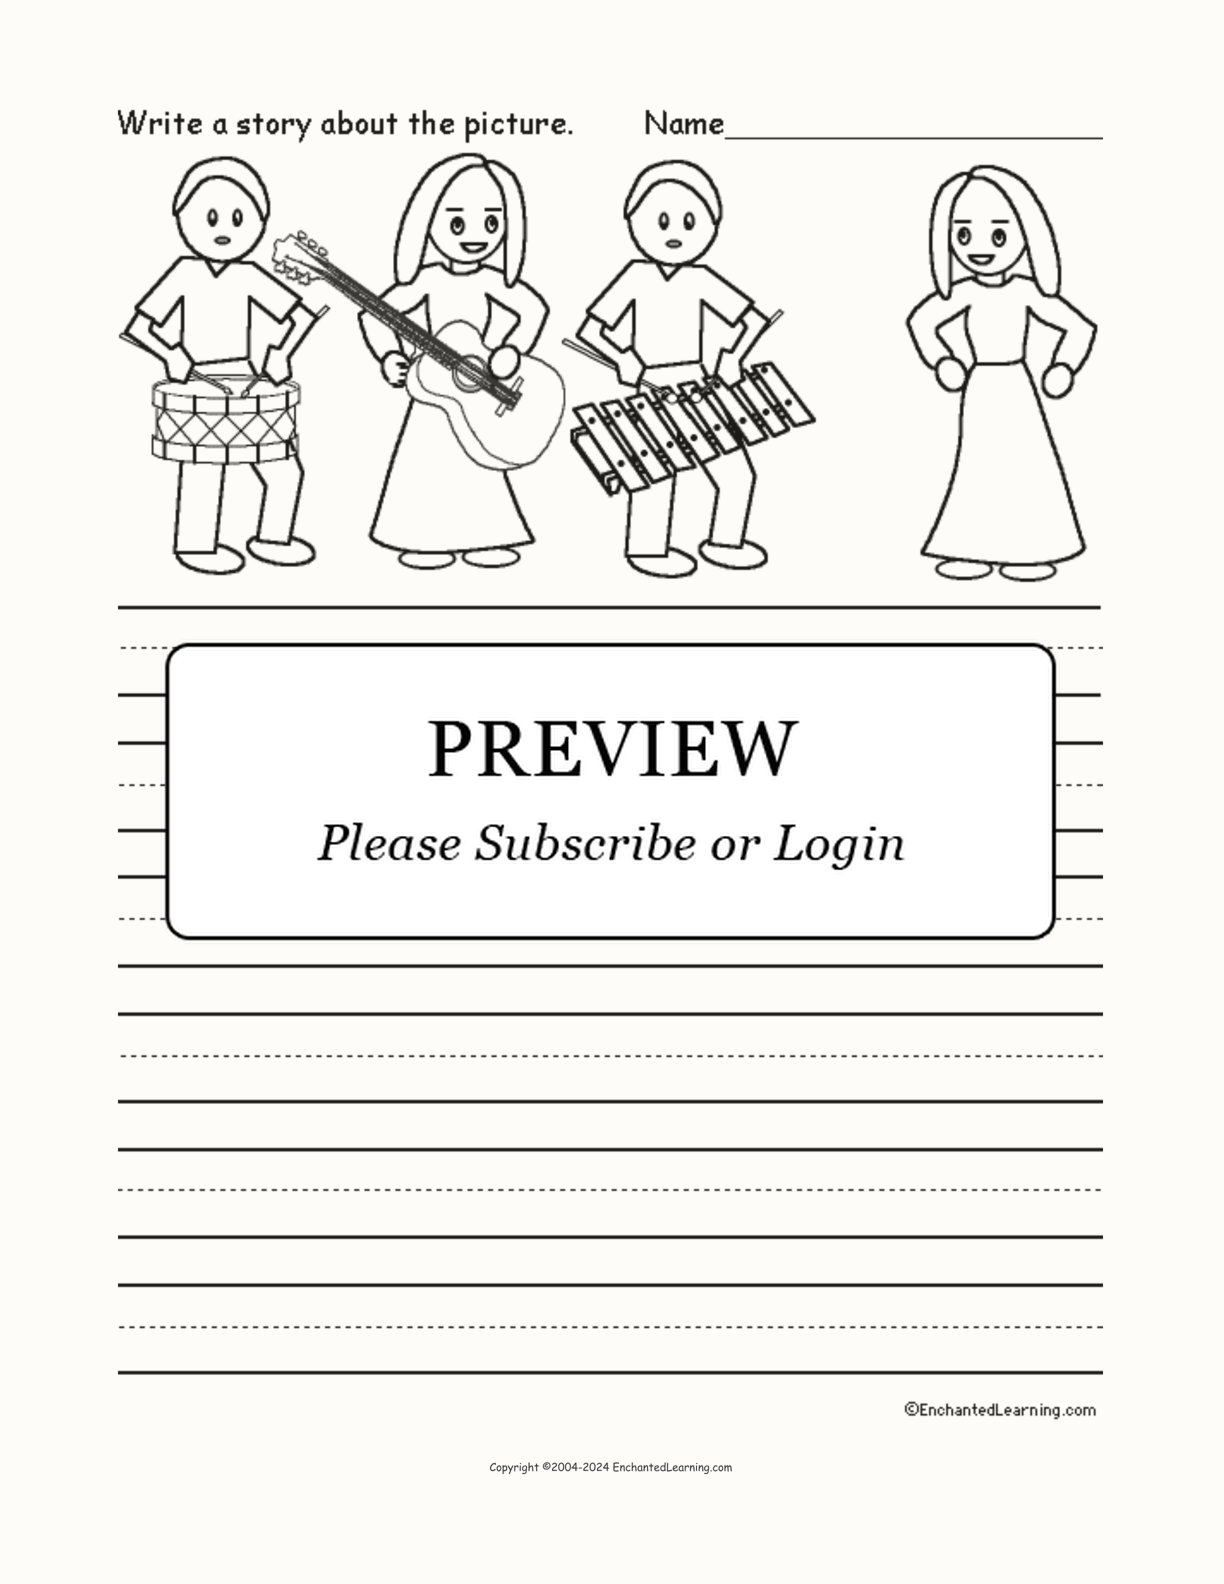 Picture Prompts - X interactive worksheet page 1